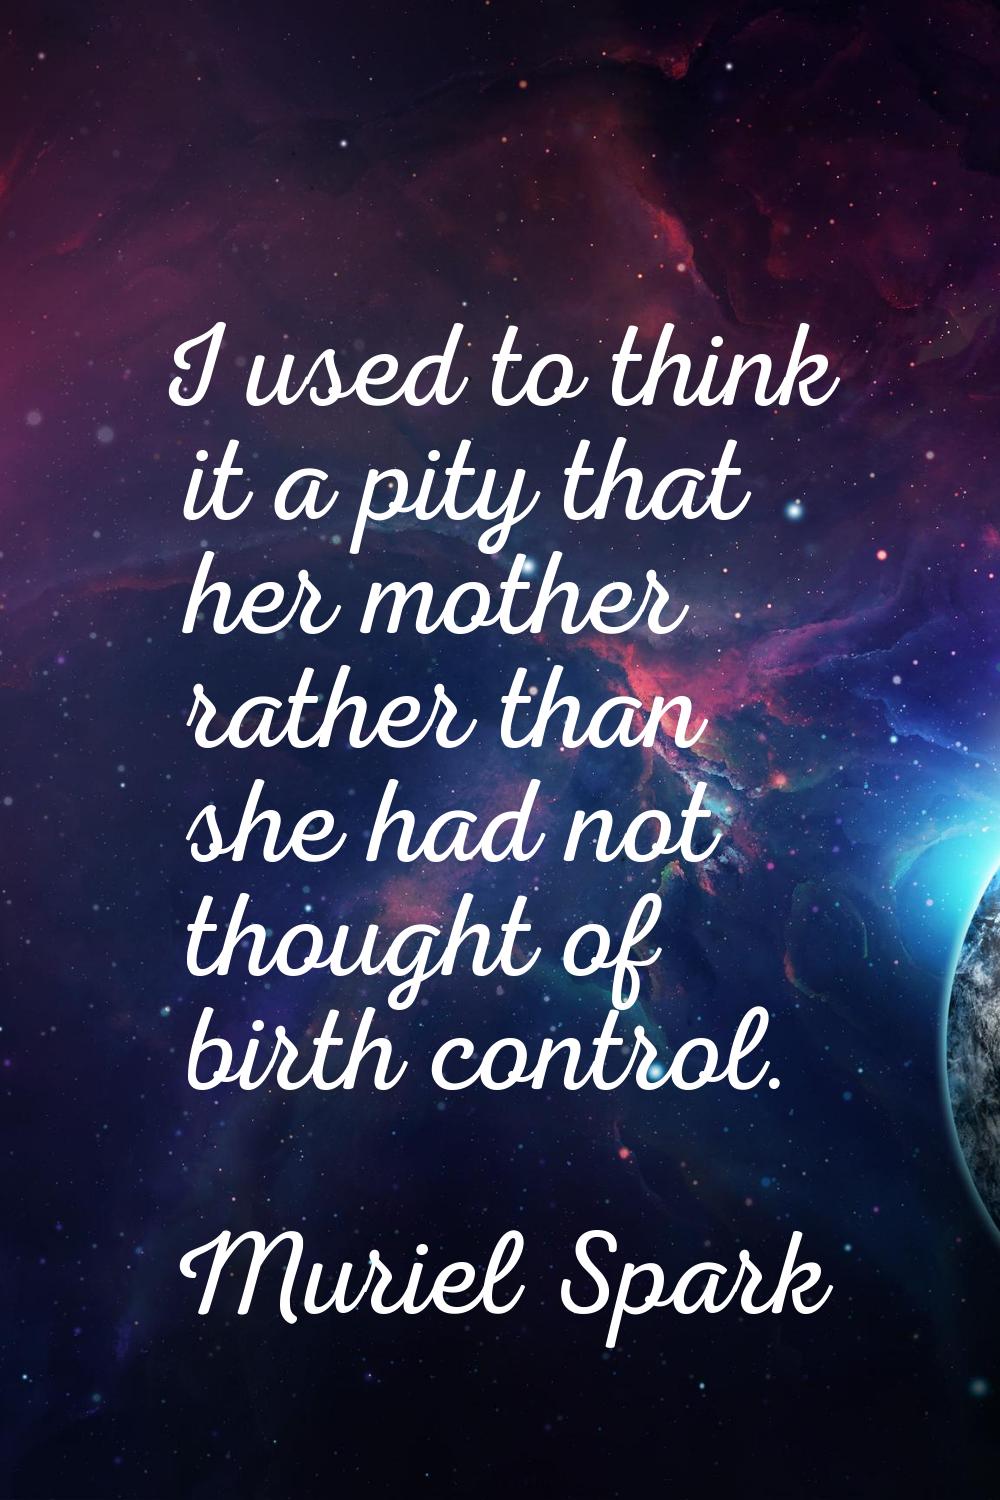 I used to think it a pity that her mother rather than she had not thought of birth control.